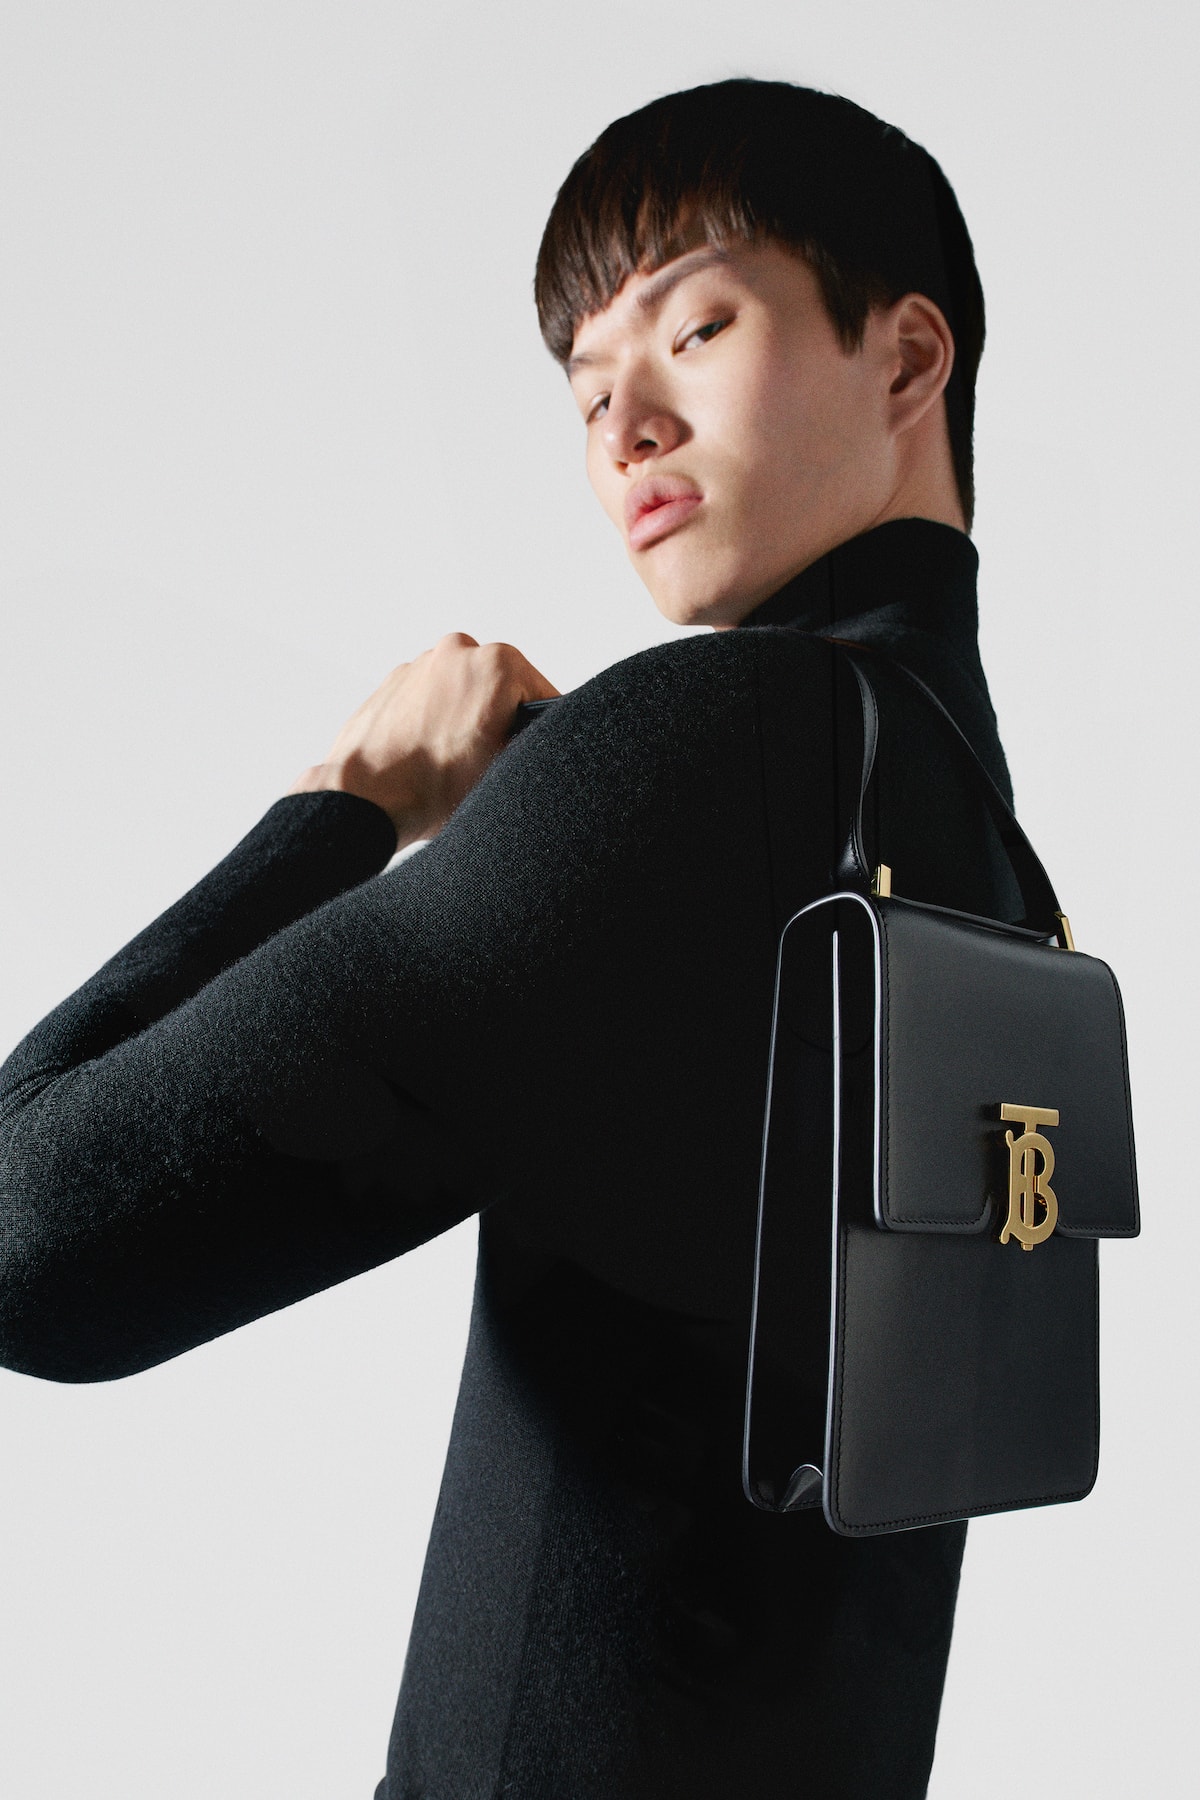 Burberry B Series Black Leather Logo Bag Drop Release Campaign 